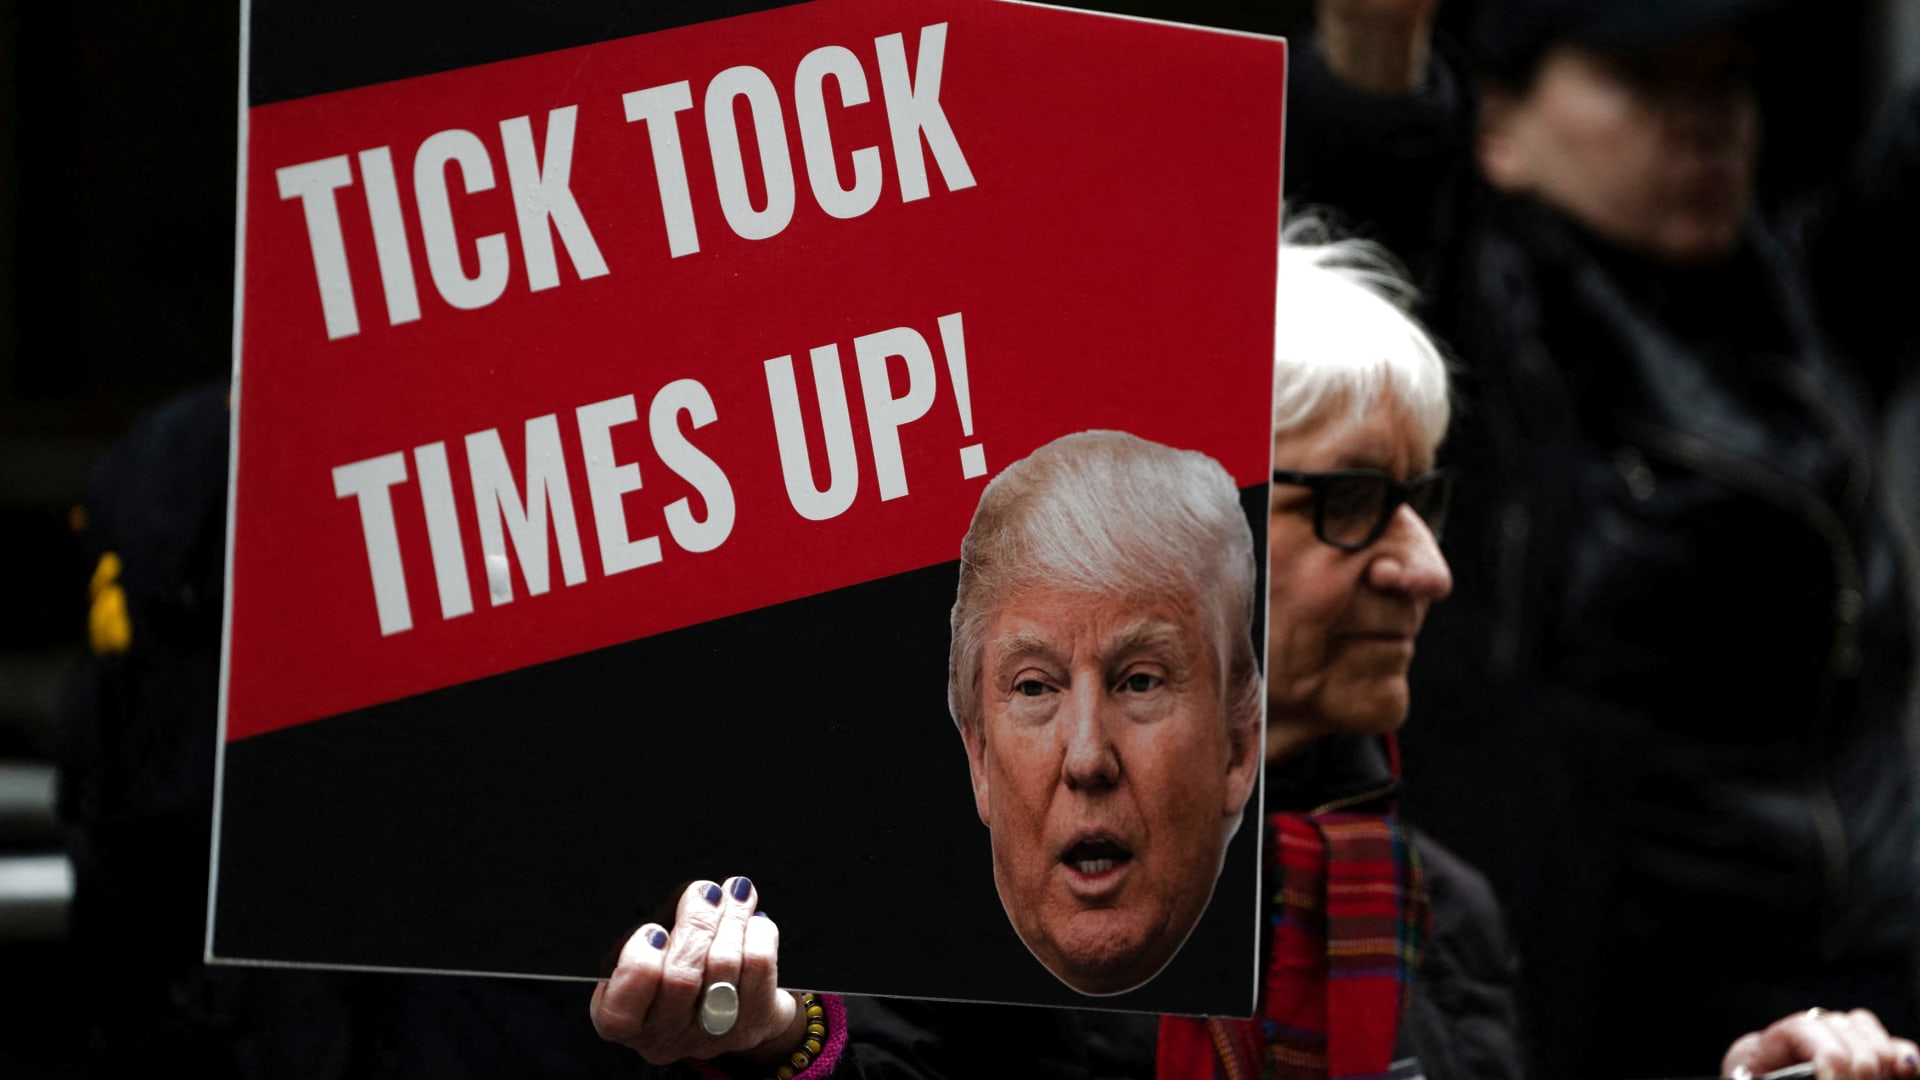 An anti-Trump protestor holds a placard outside the District Attorney's office, as Manhattan District Attorney Alvin Bragg's office investigates $130,000 paid in the final weeks of former U.S. President Donald Trump's 2016 election campaign to Stormy Daniels, a porn star who said she had a sexual encounter with Trump in 2006 when he was married to his current wife Melania, in New York City, U.S. March 24, 2023.